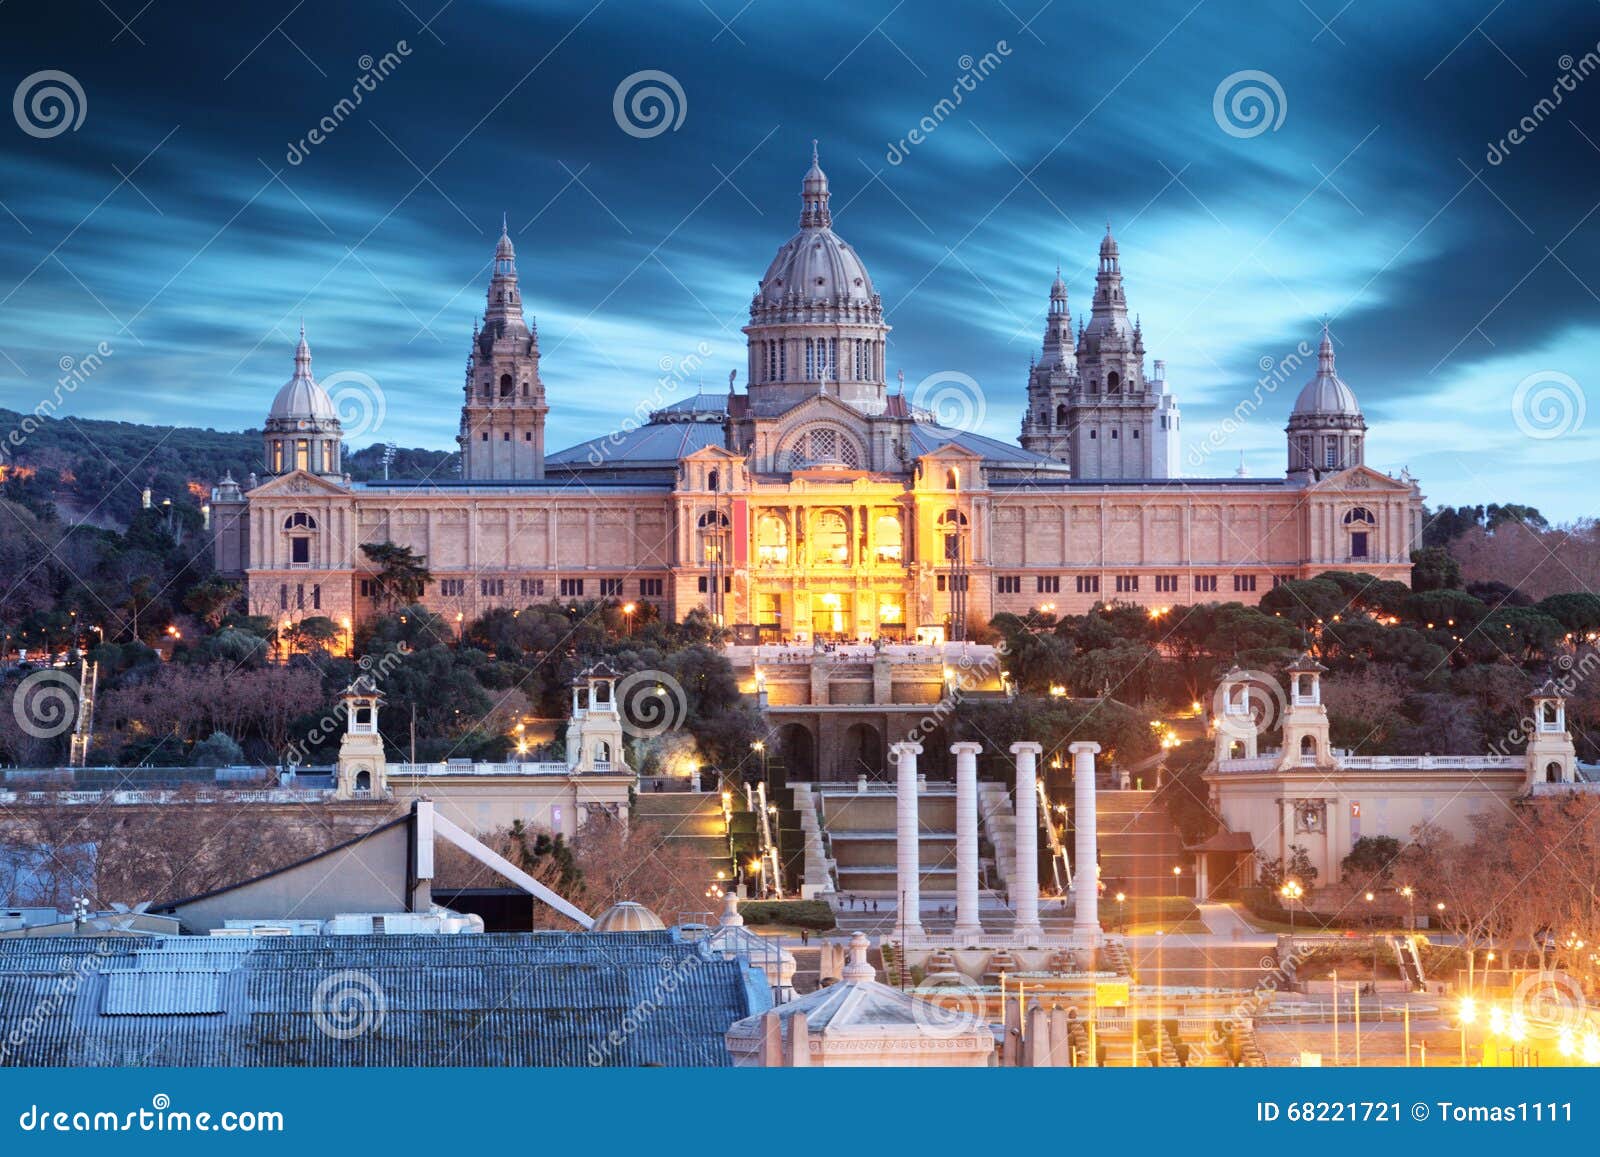 mnac museum located at montjuic area in barcelona, spain